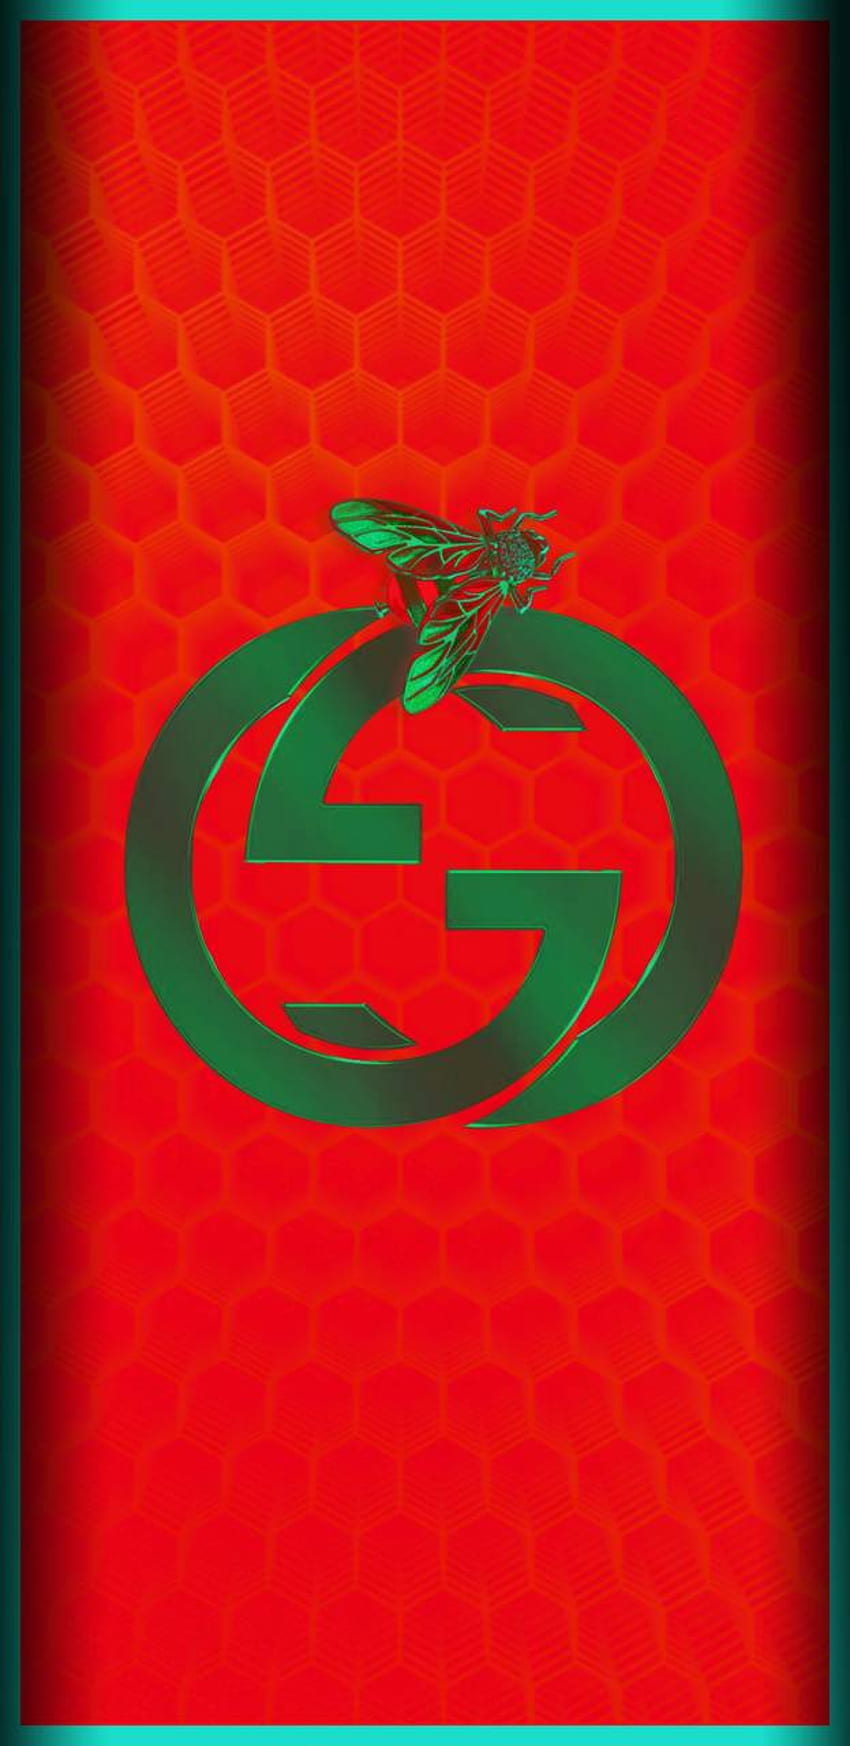 GUCCI RED AND GREEN, Gucci 11 HD phone wallpaper